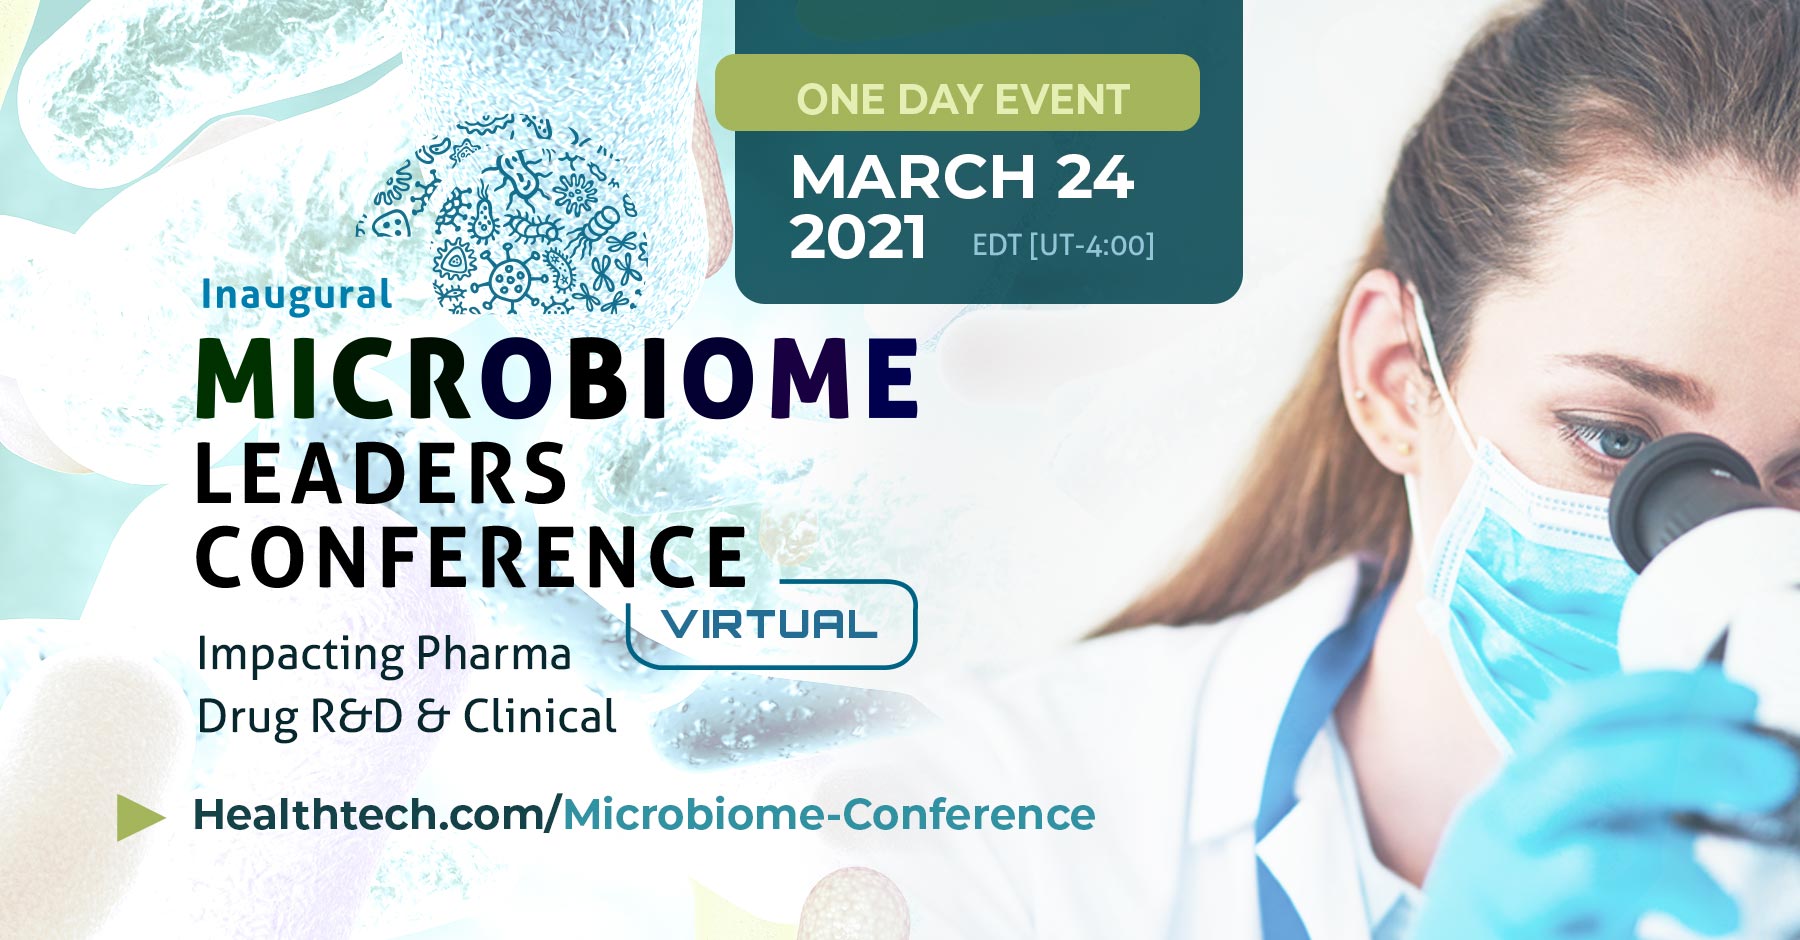 Microbiome Leaders Conference March 24, Virtual